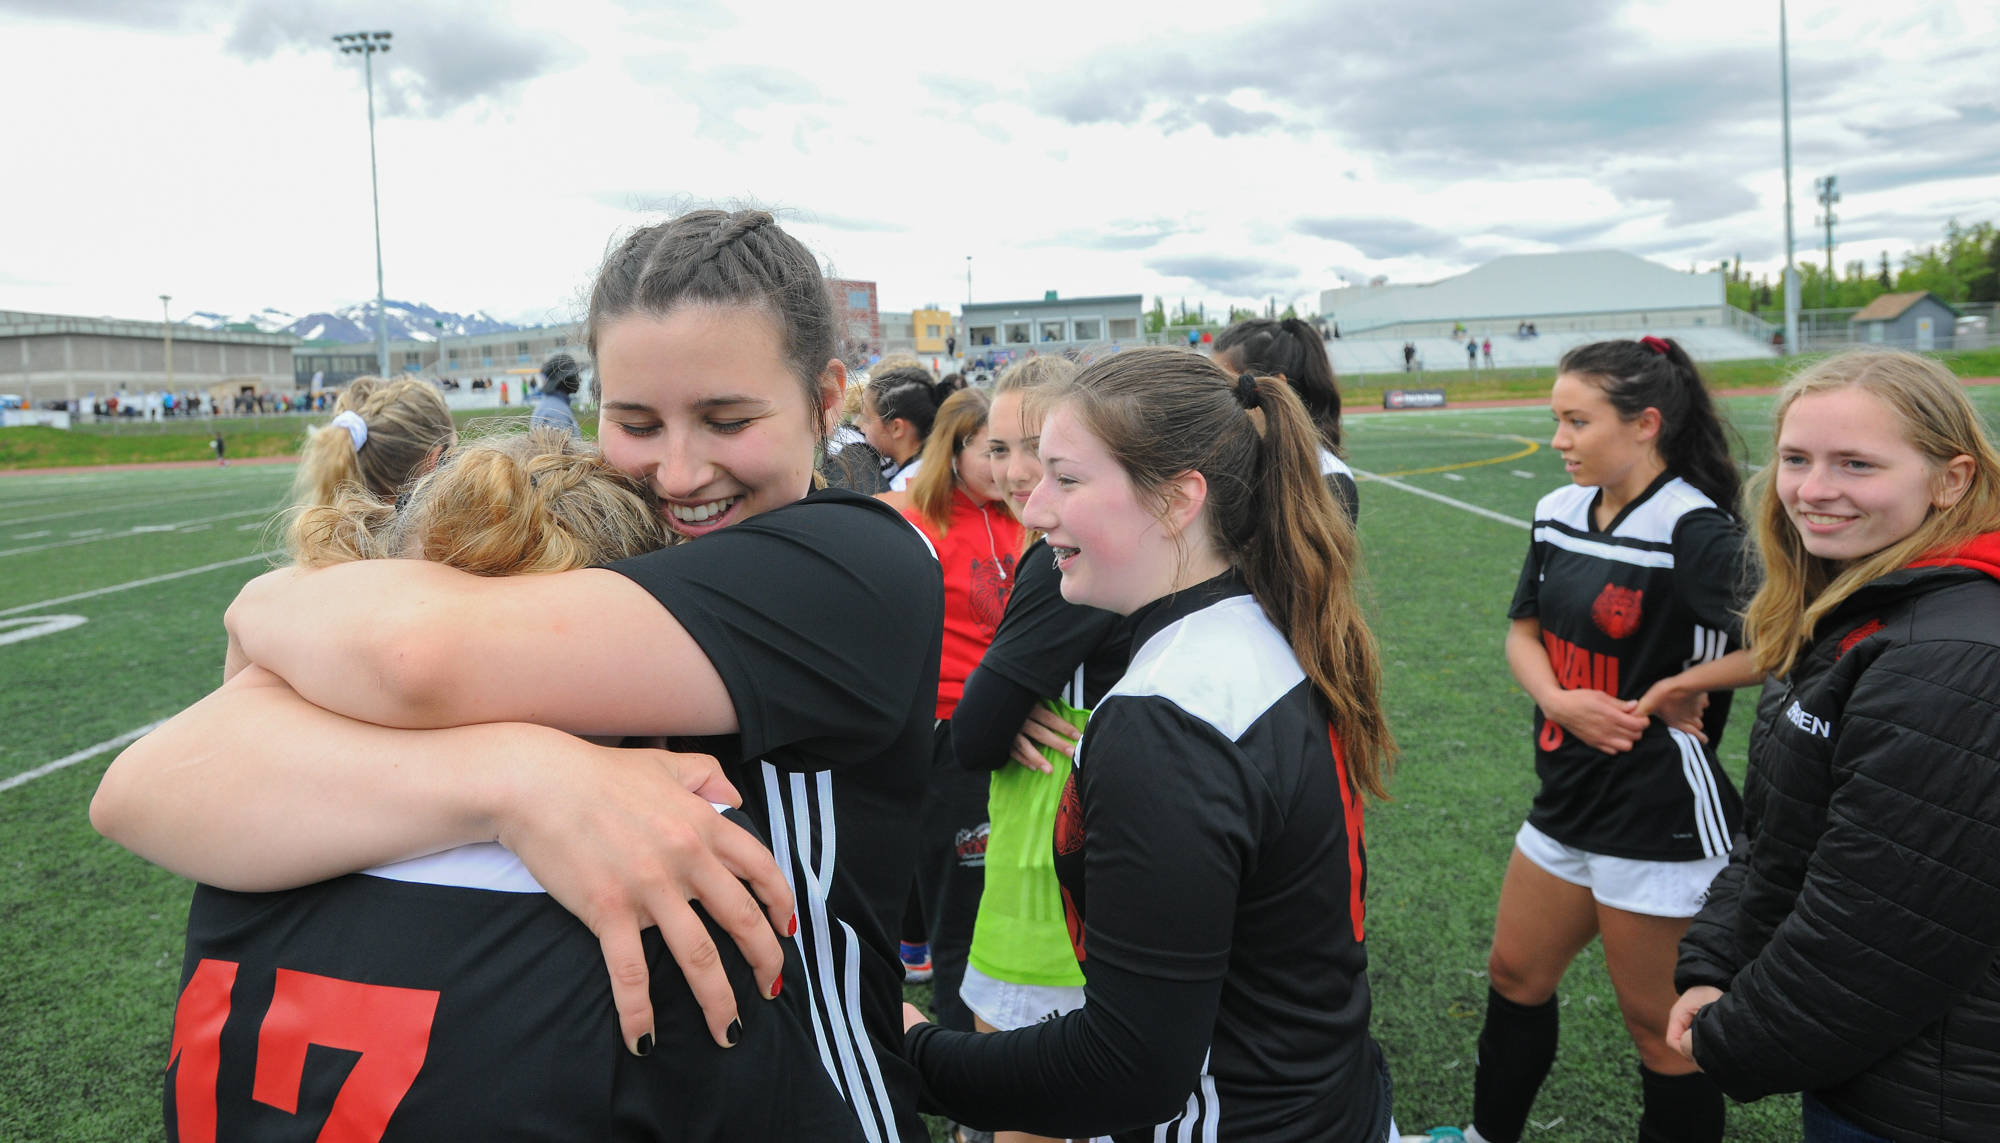 Juneau-Douglas’ Nikki Box, facing camera, hugs teammate Taylor Bentley immediately following the team’s 5-1 win over Soldotna in the ASAA/First National Bank Alaska soccer state championship match Saturday afternoon at Service High School in Anchorage. (Michael Dinneen | For the Juneau Empire)